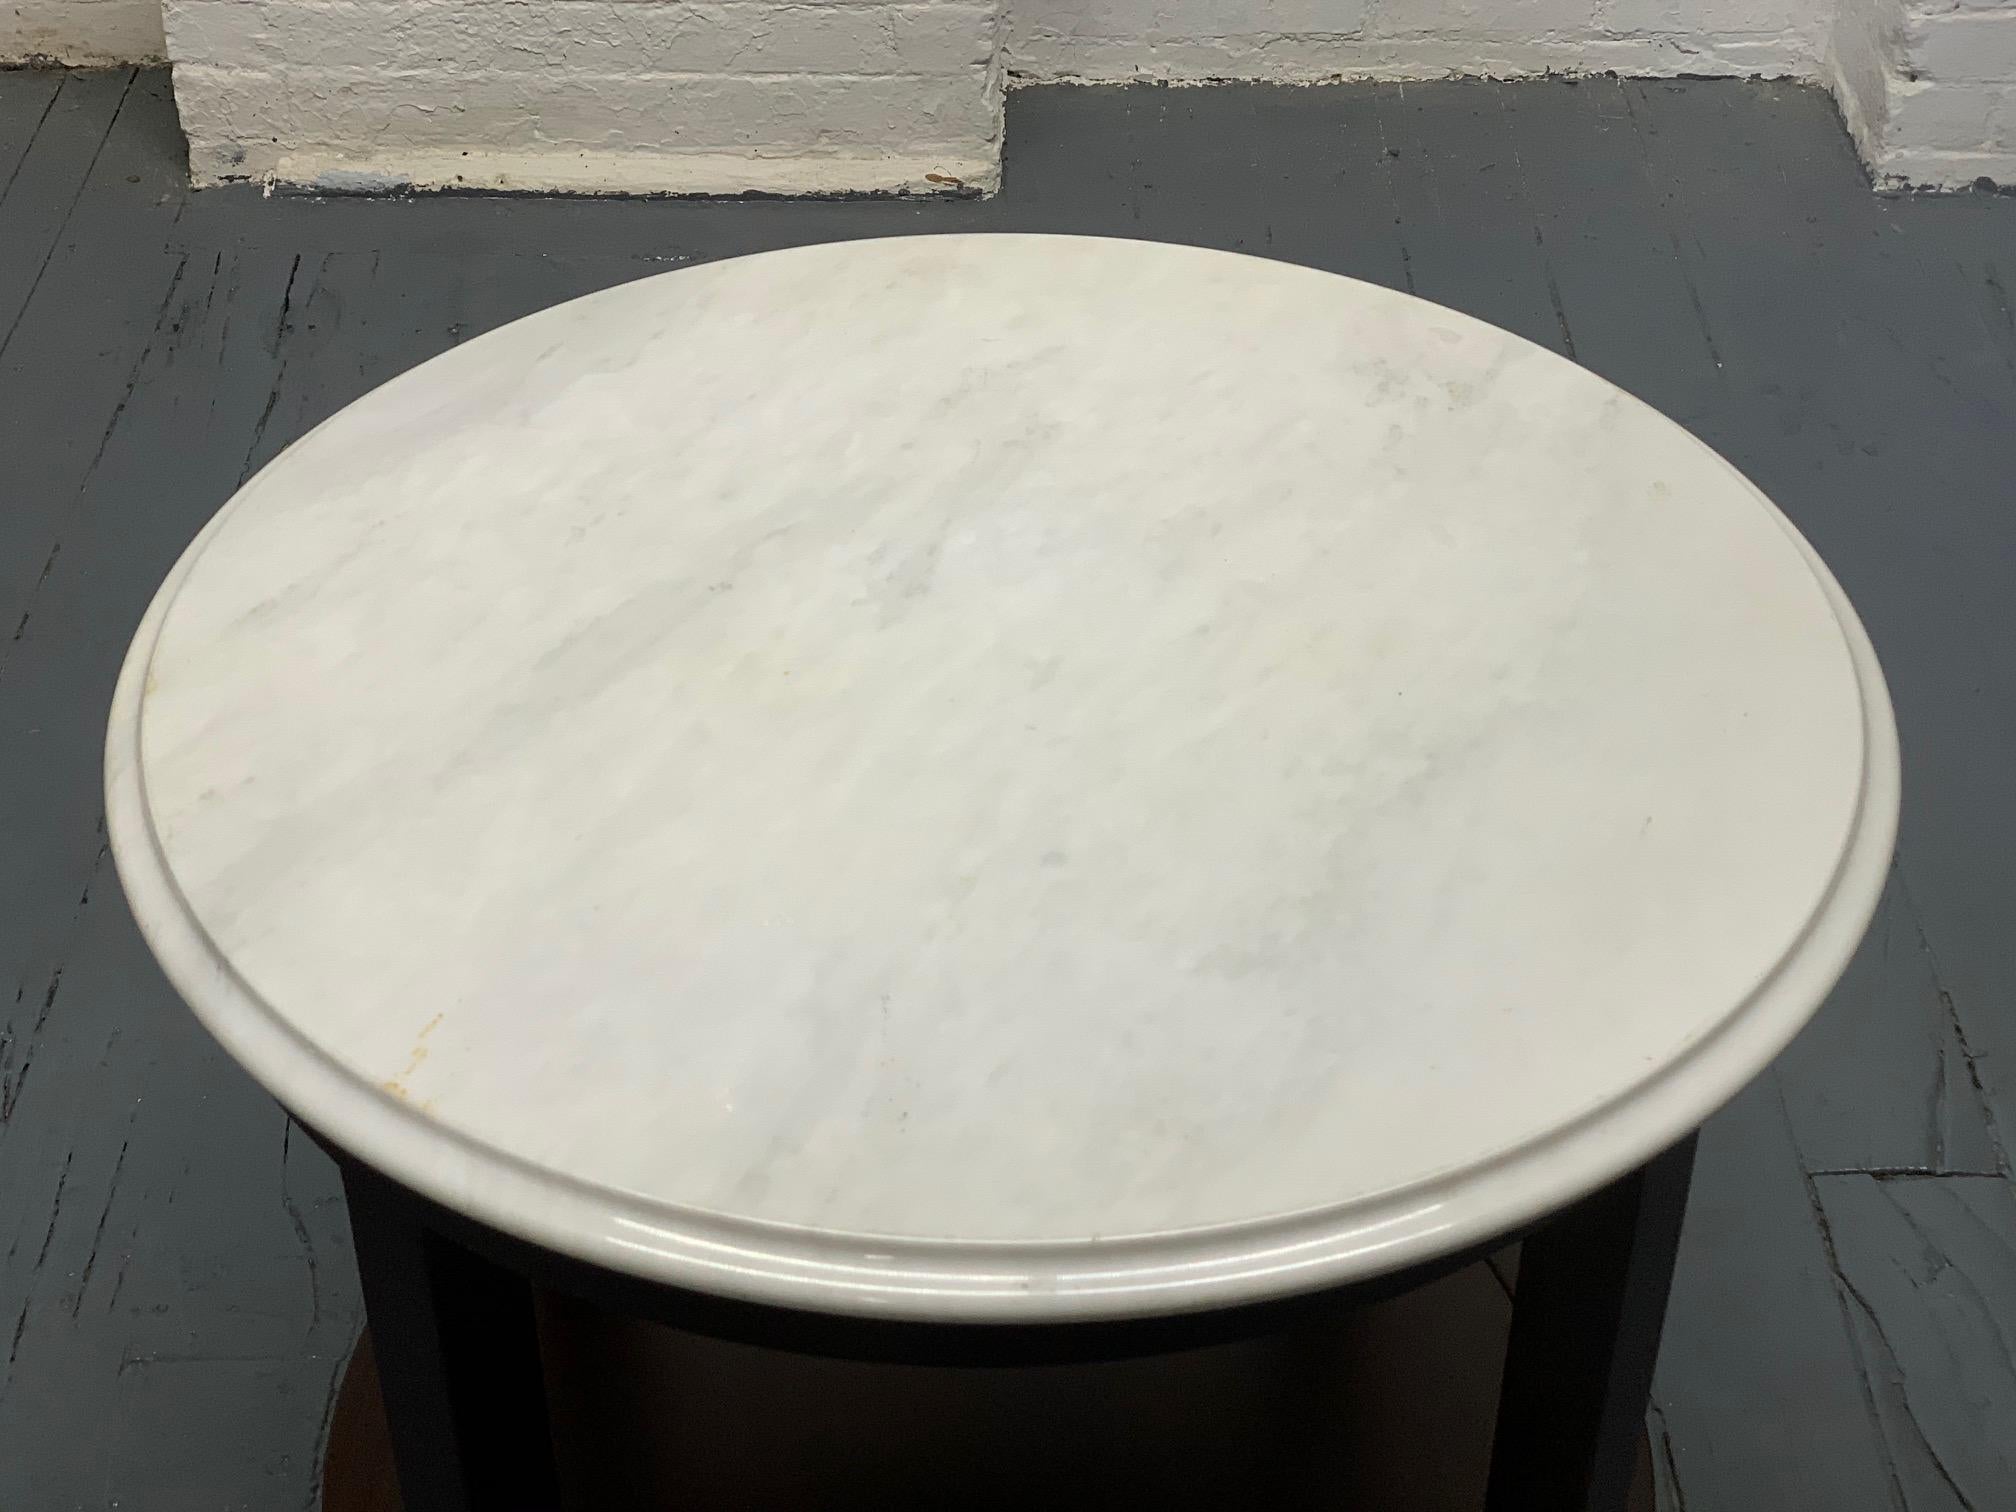 Marble-top side table by Baker Furniture Company.